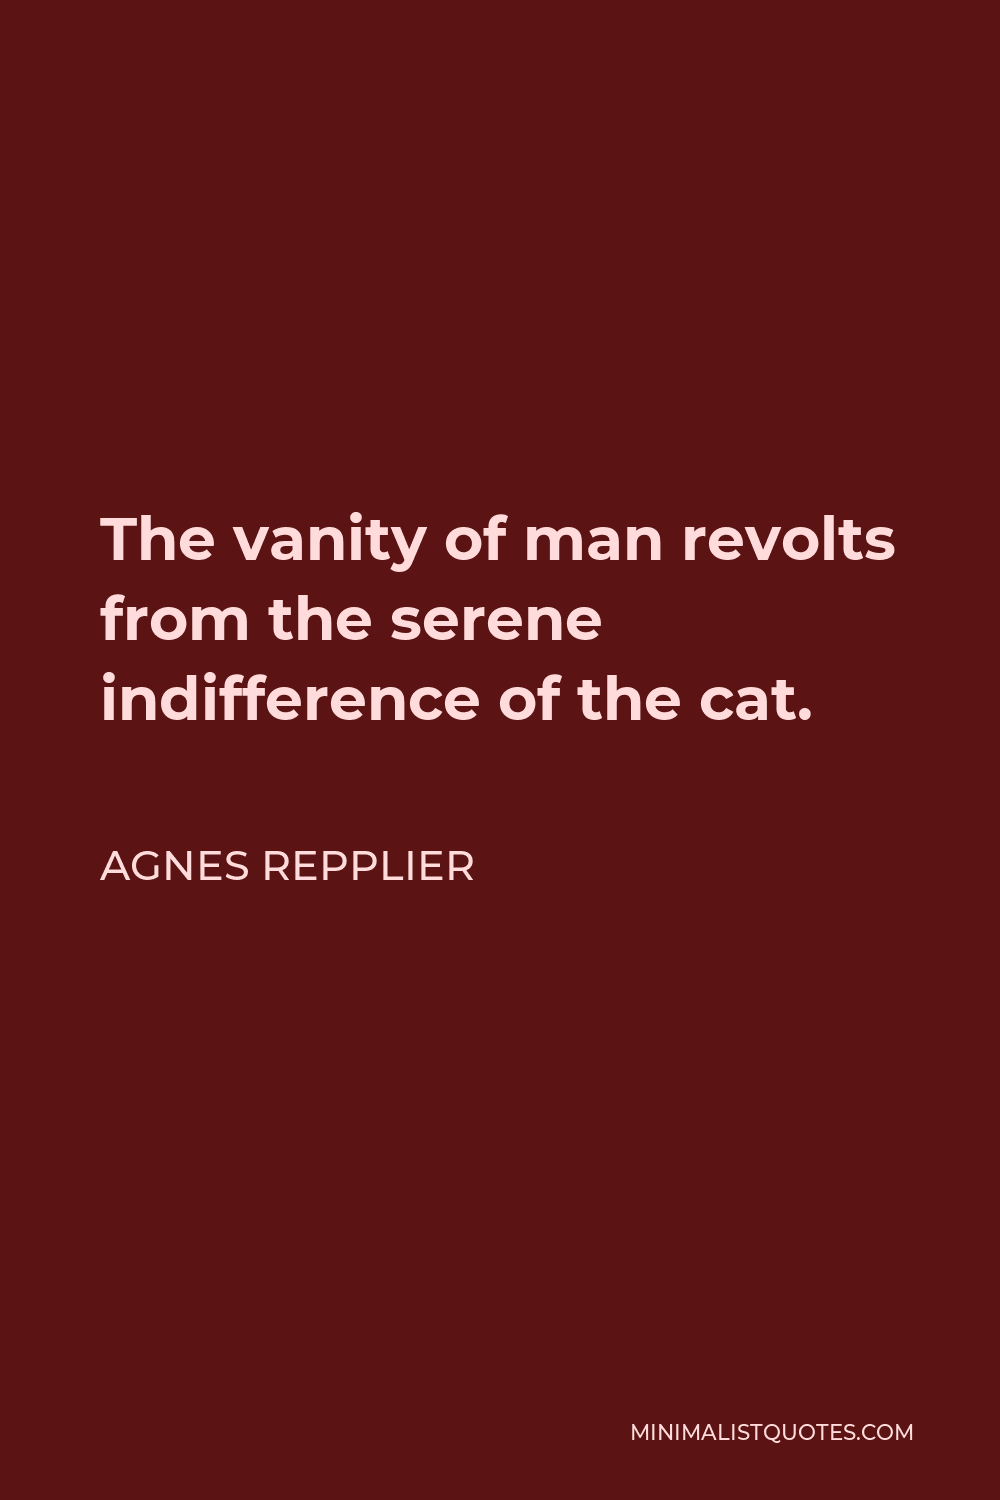 Agnes Repplier Quote - The vanity of man revolts from the serene indifference of the cat.